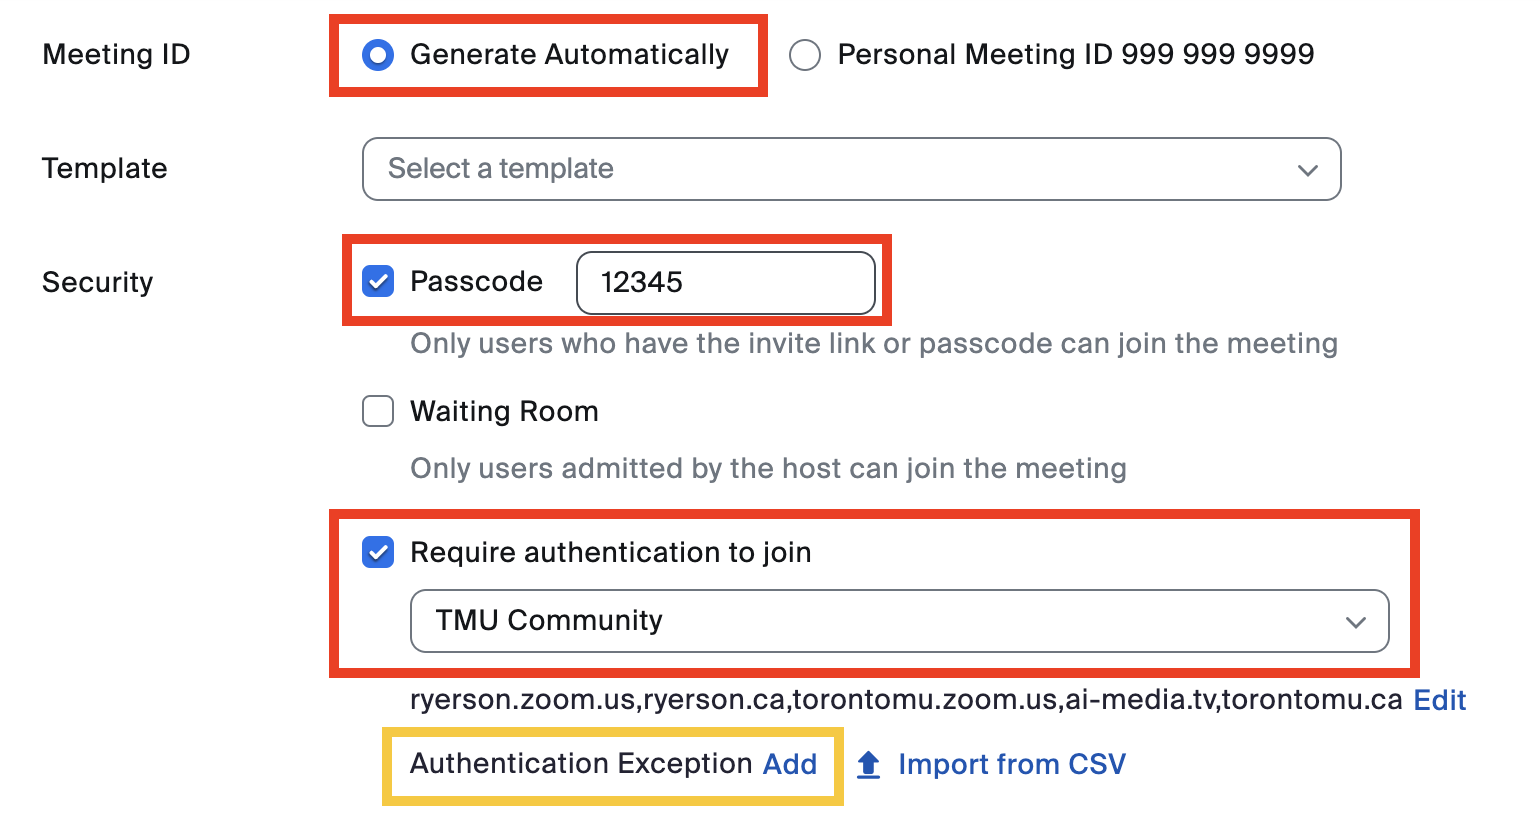 Ensure the security settings are enabled for your Zoom meeting